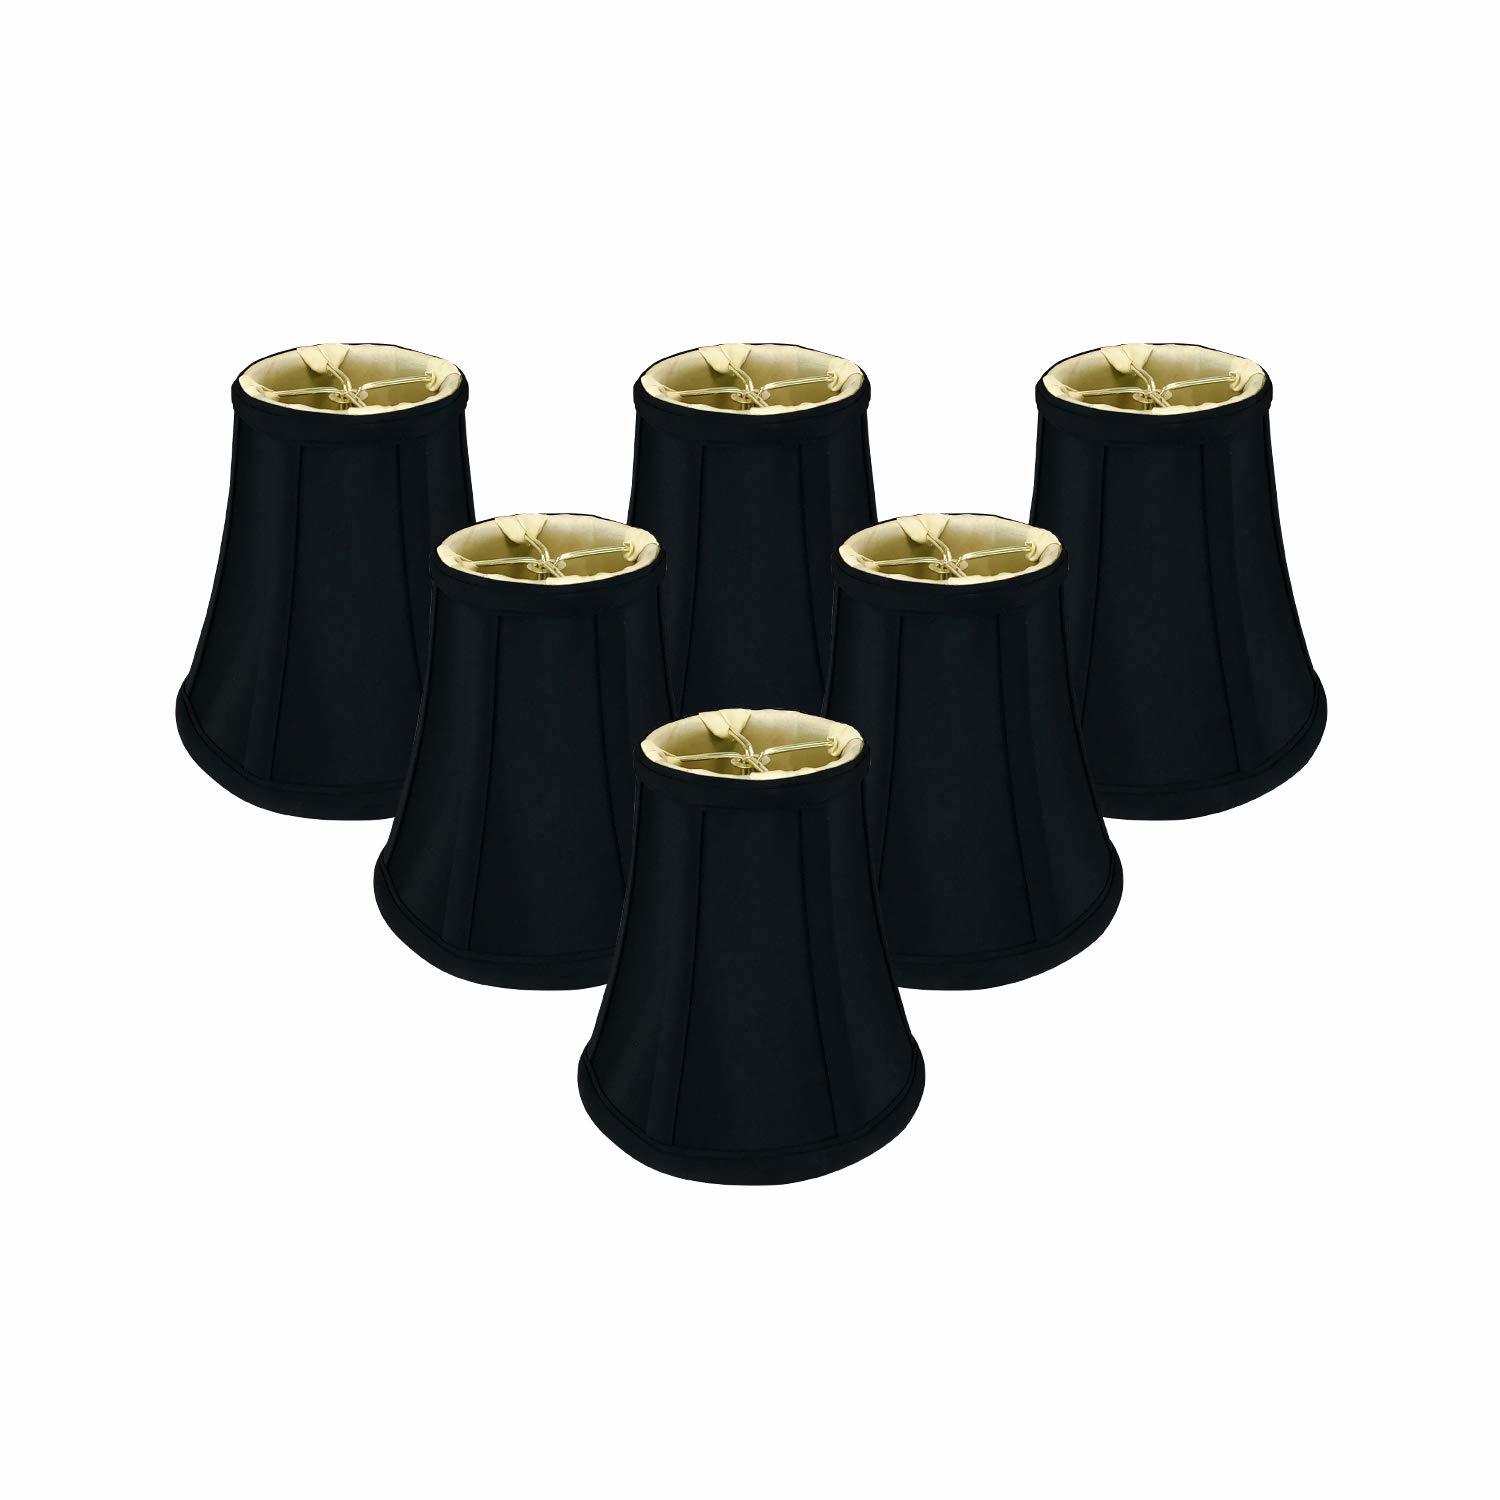 Primary image for Royal Designs, Inc. True Bell Lamp Shade with Flame Clip Fitter, BS-704FC-6BLK-6